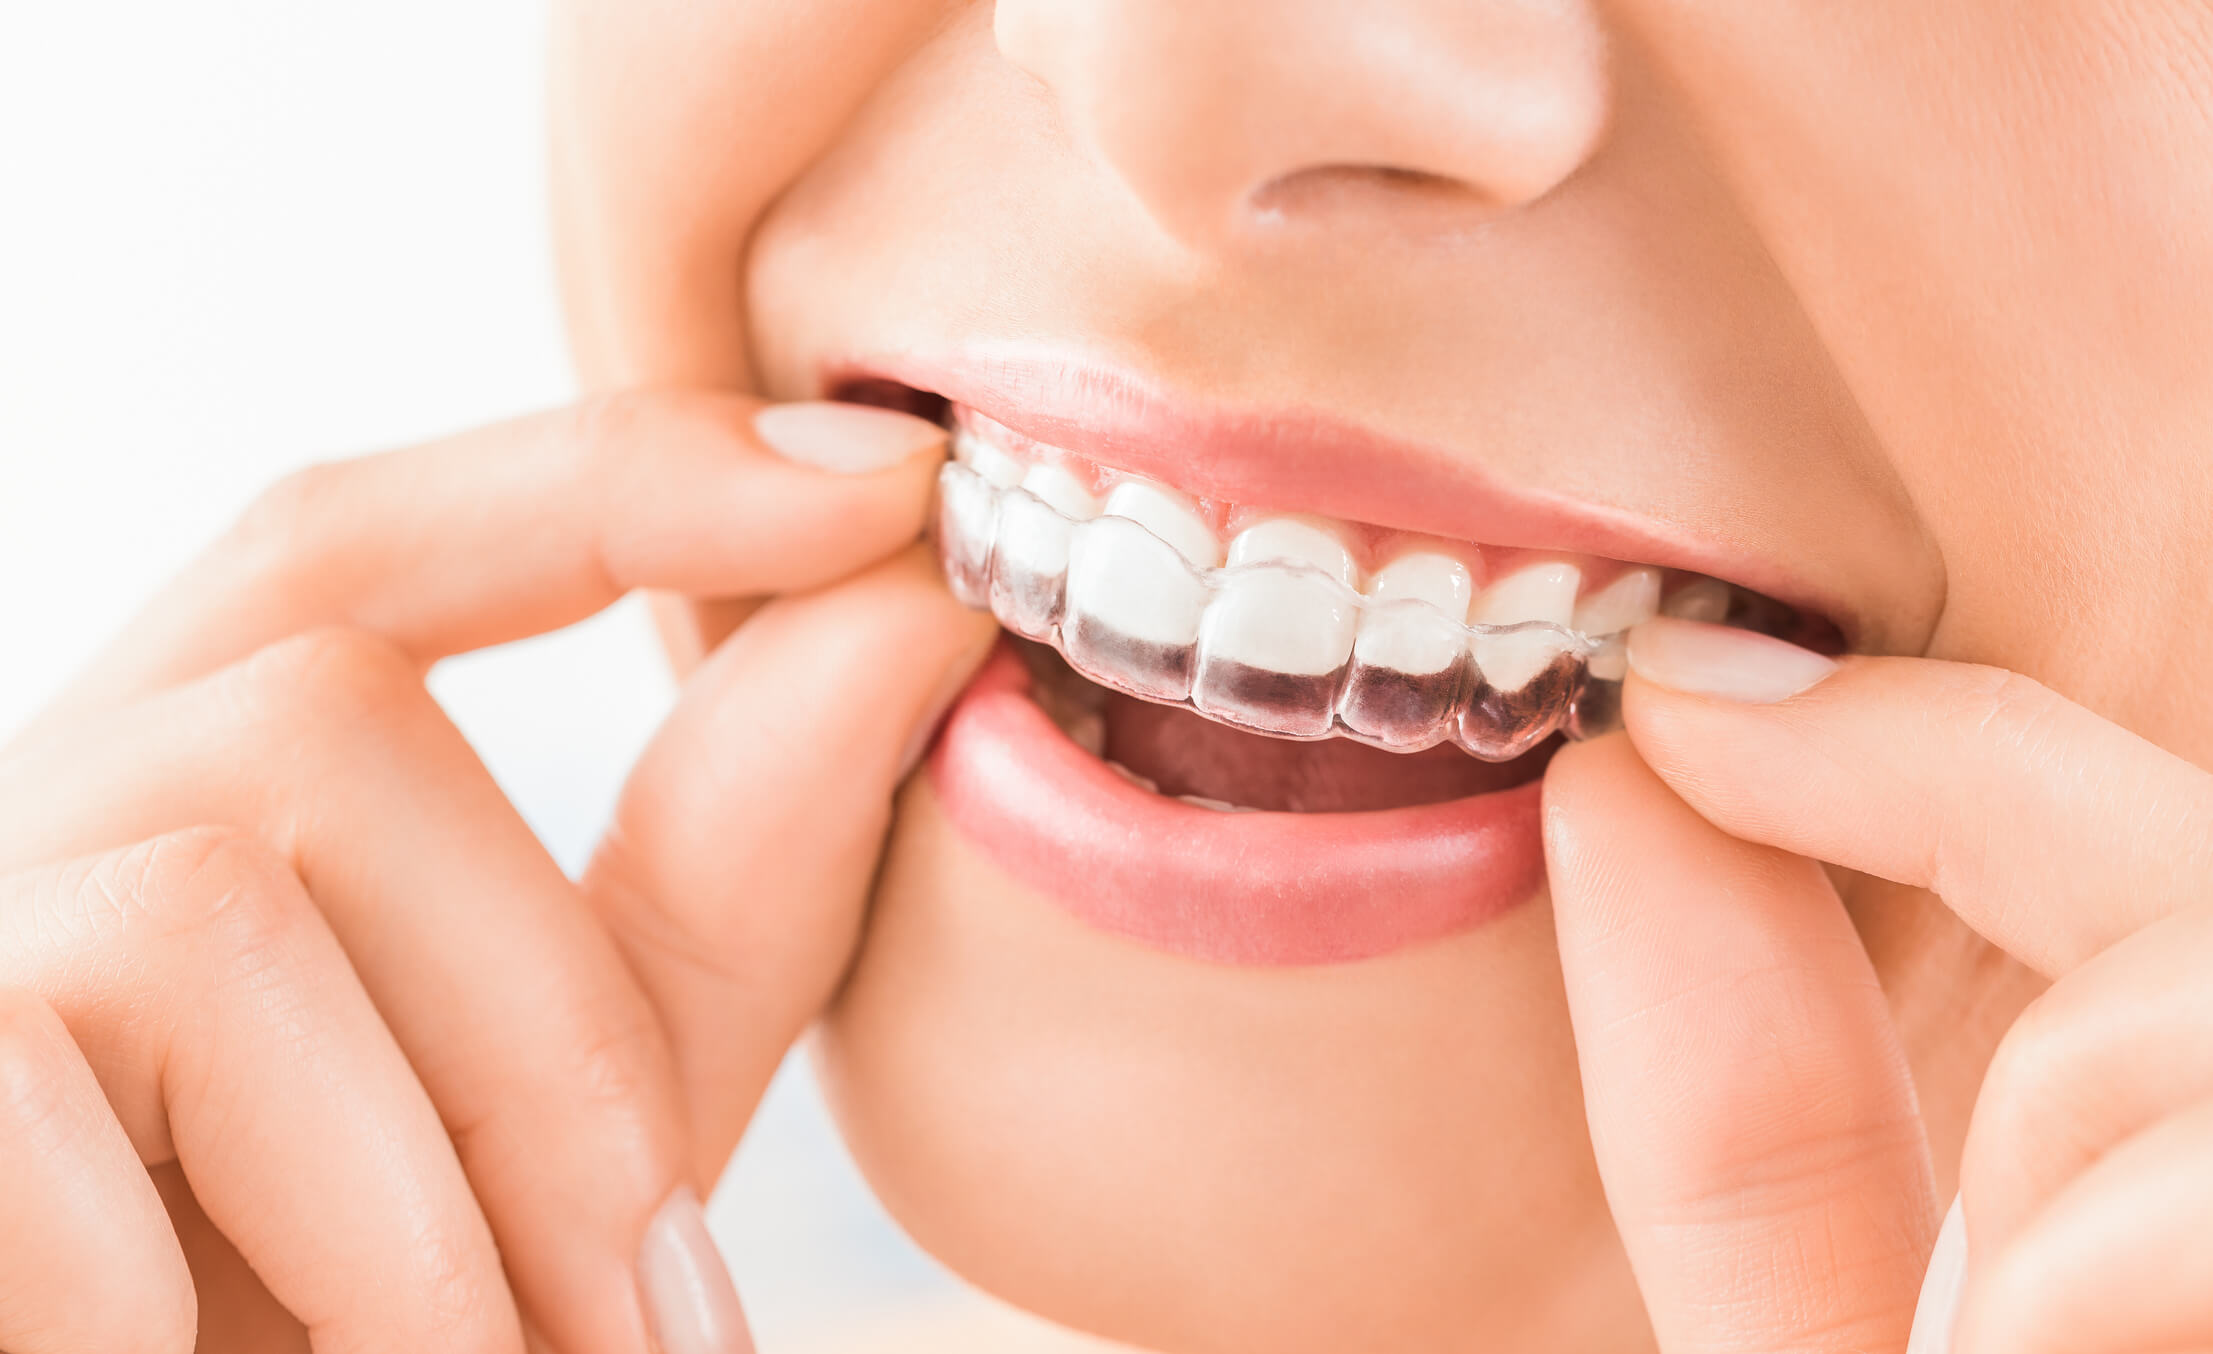 Transform your smile with Invisalign at Aquila Dental Chandler AZ